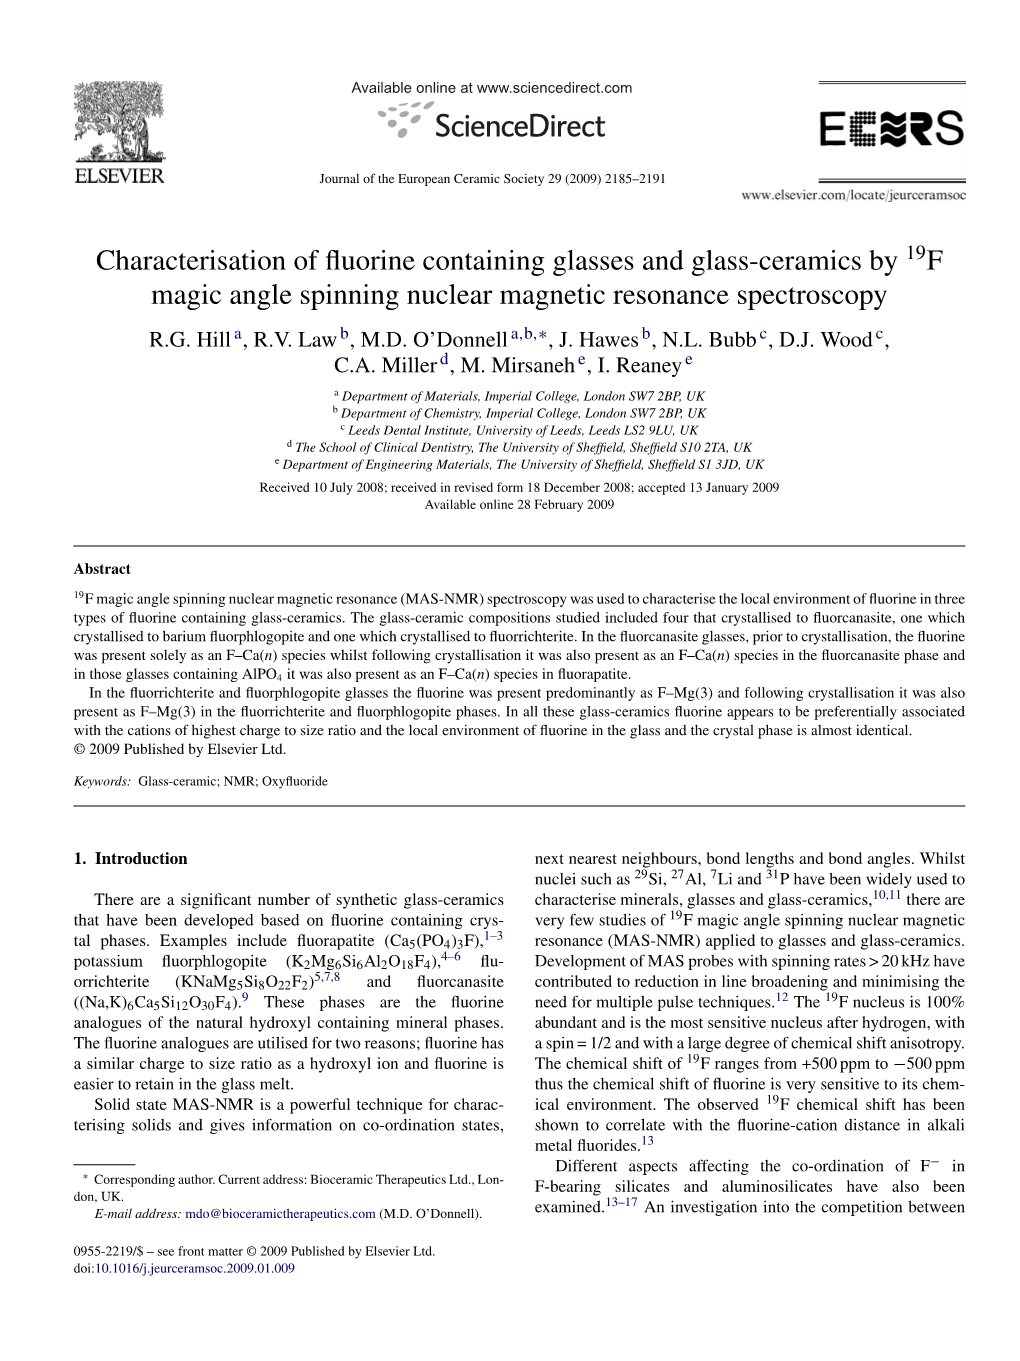 Characterisation of Fluorine Containing Glasses and Glass-Ceramics